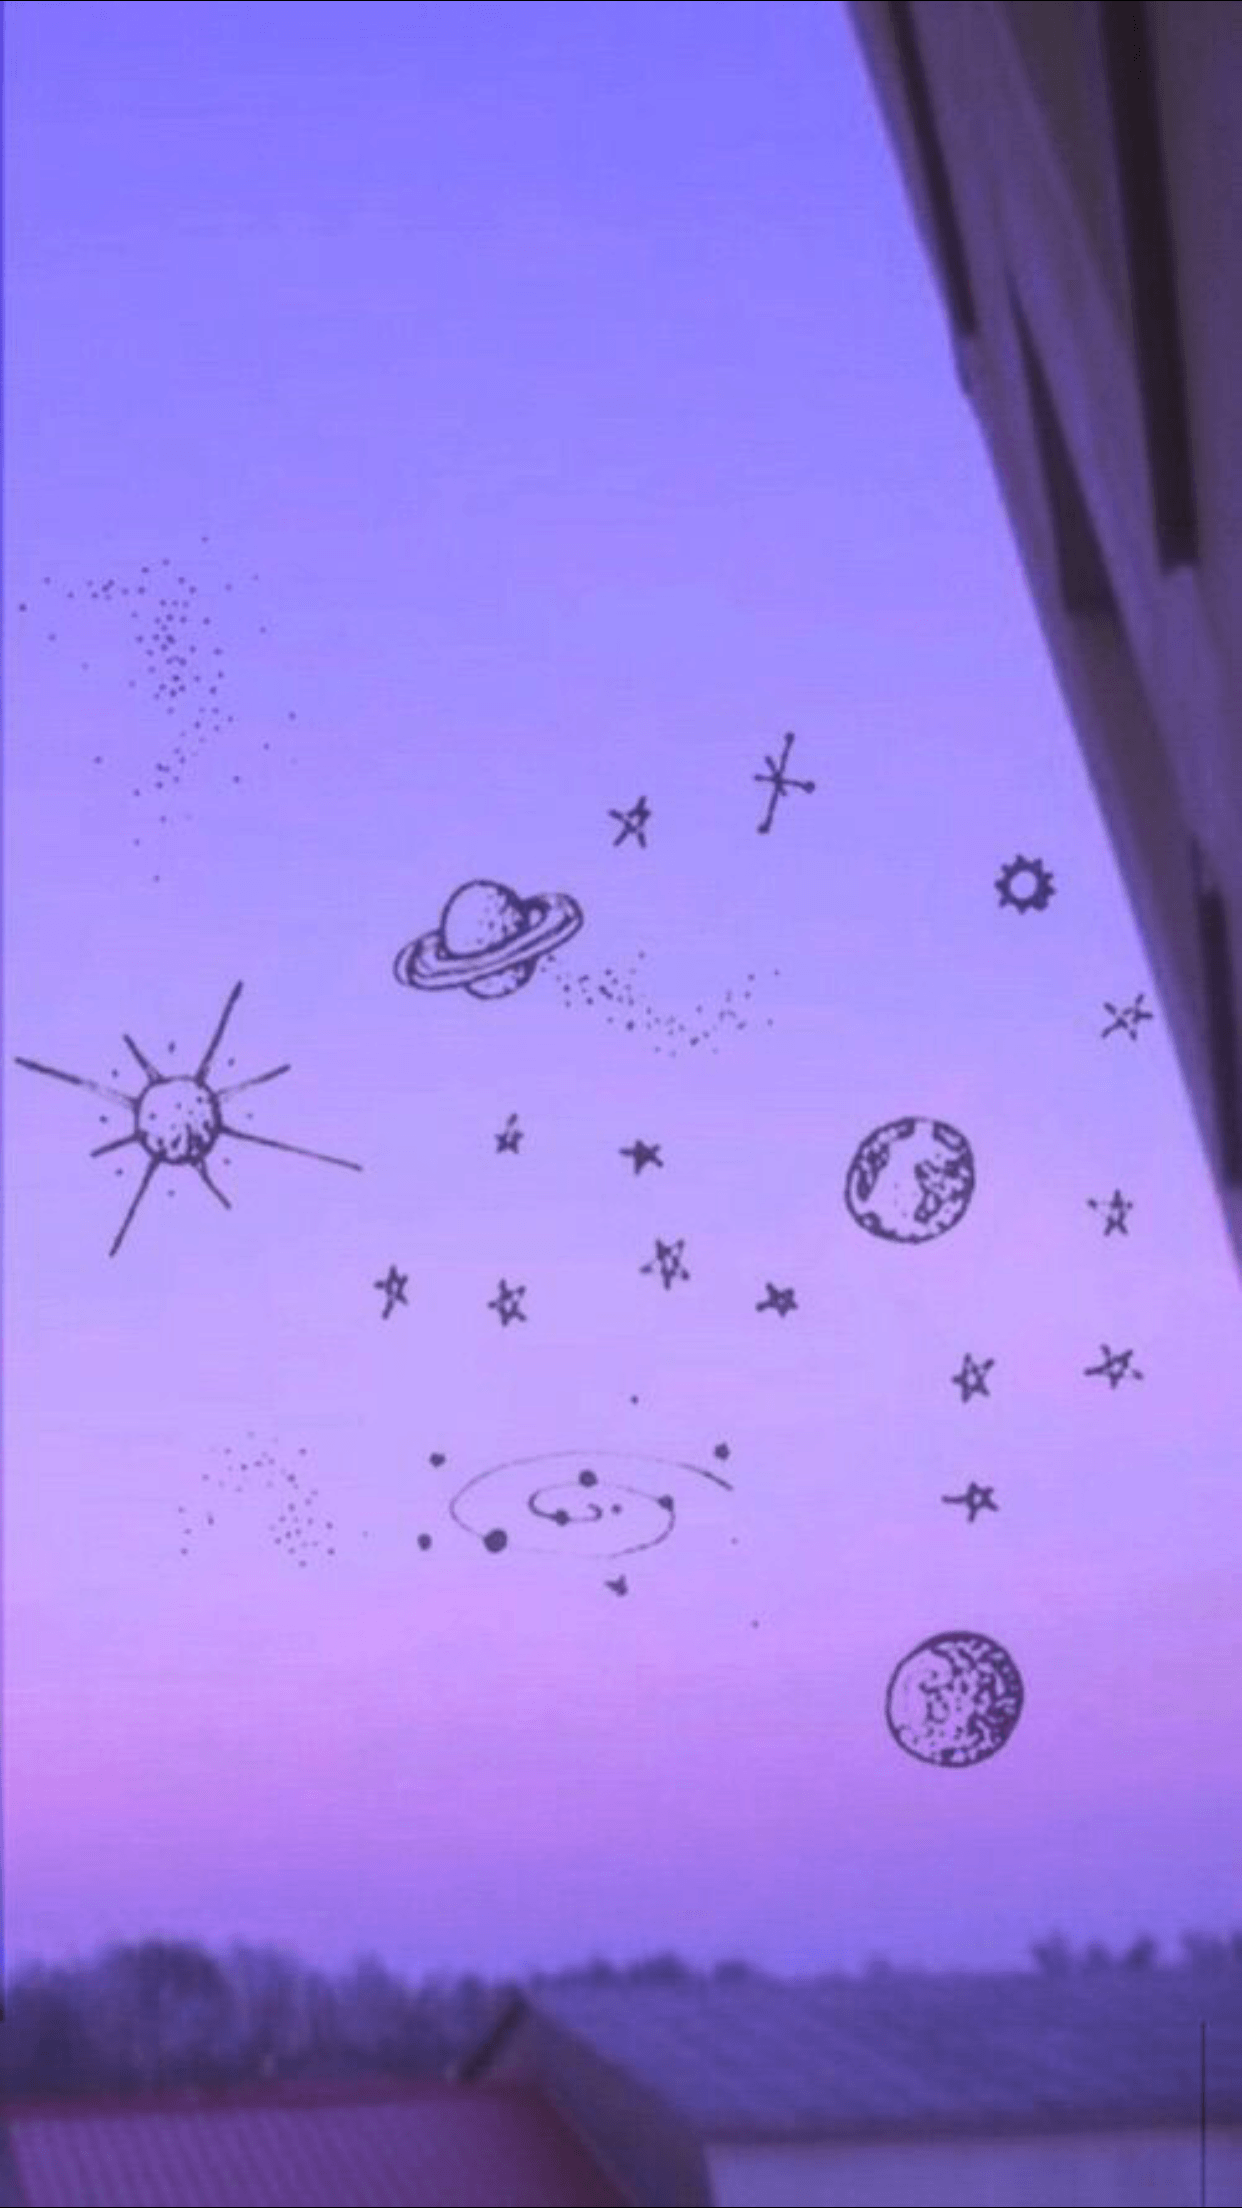 A purple and blue image of the night sky with stars and planets - Indie